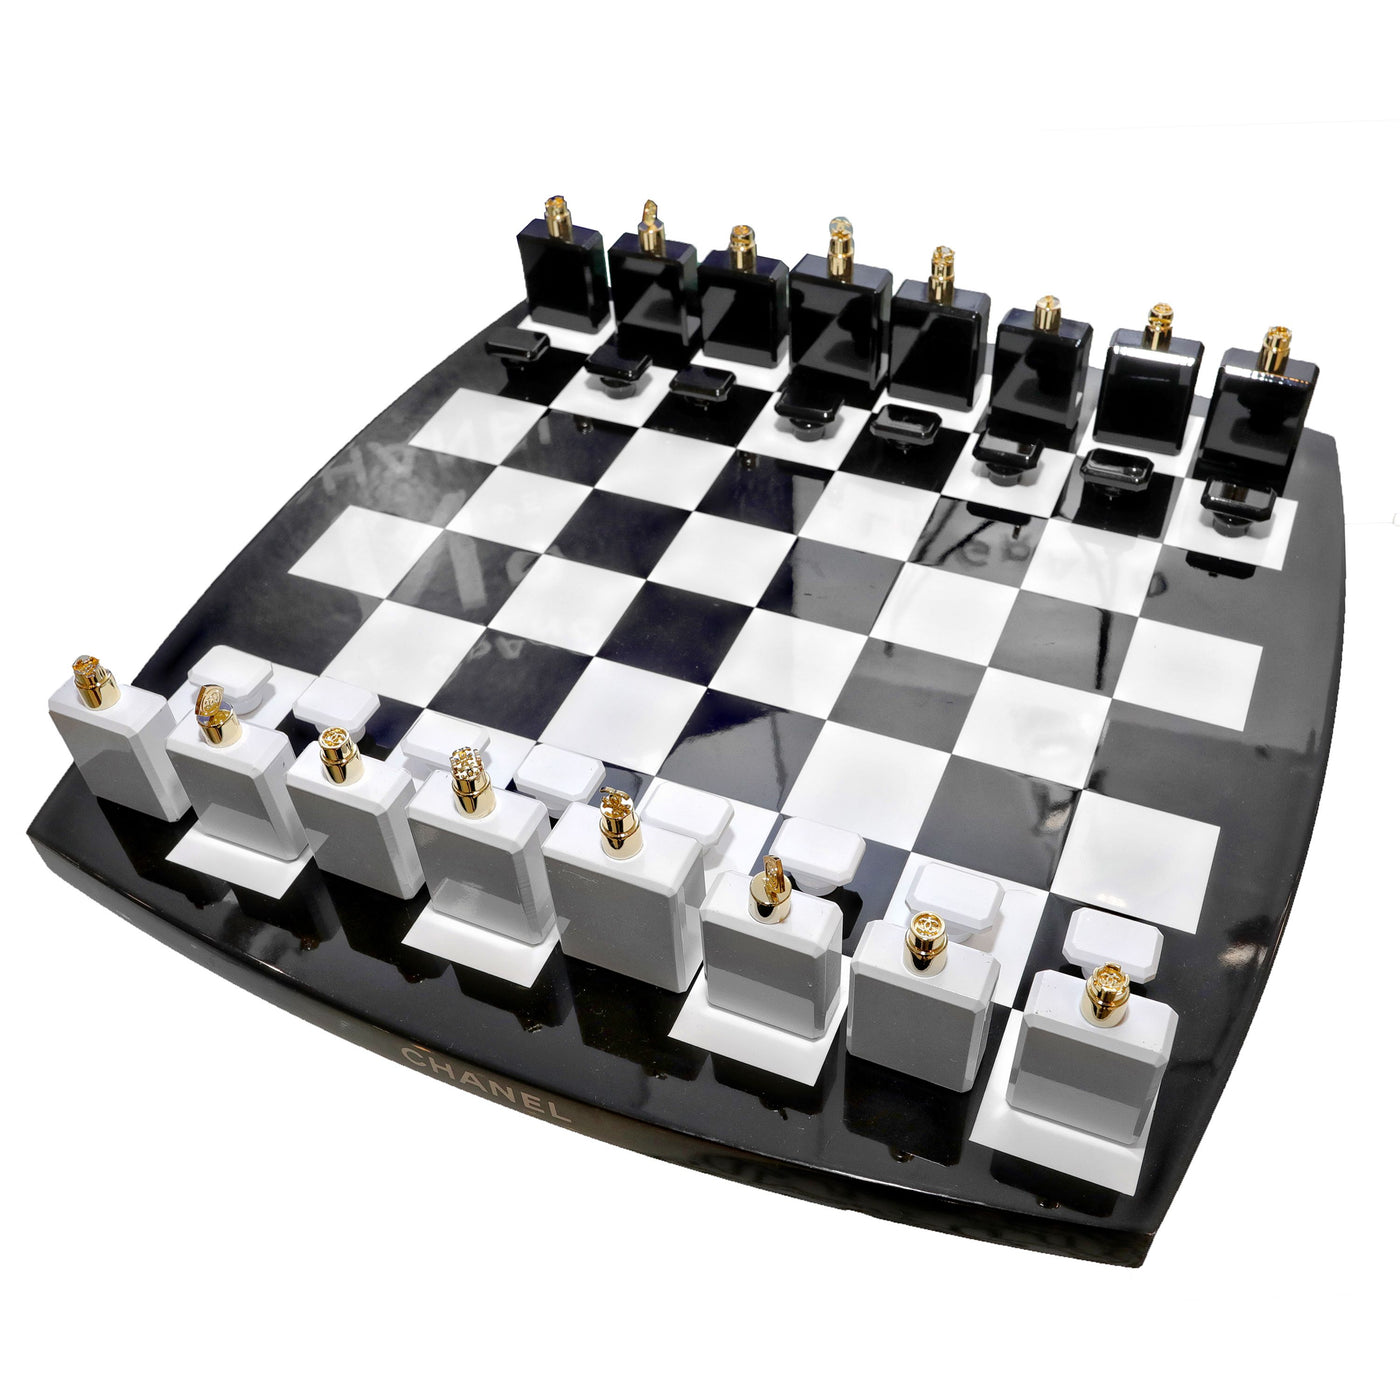 Chanel Limited Edition Chess Set